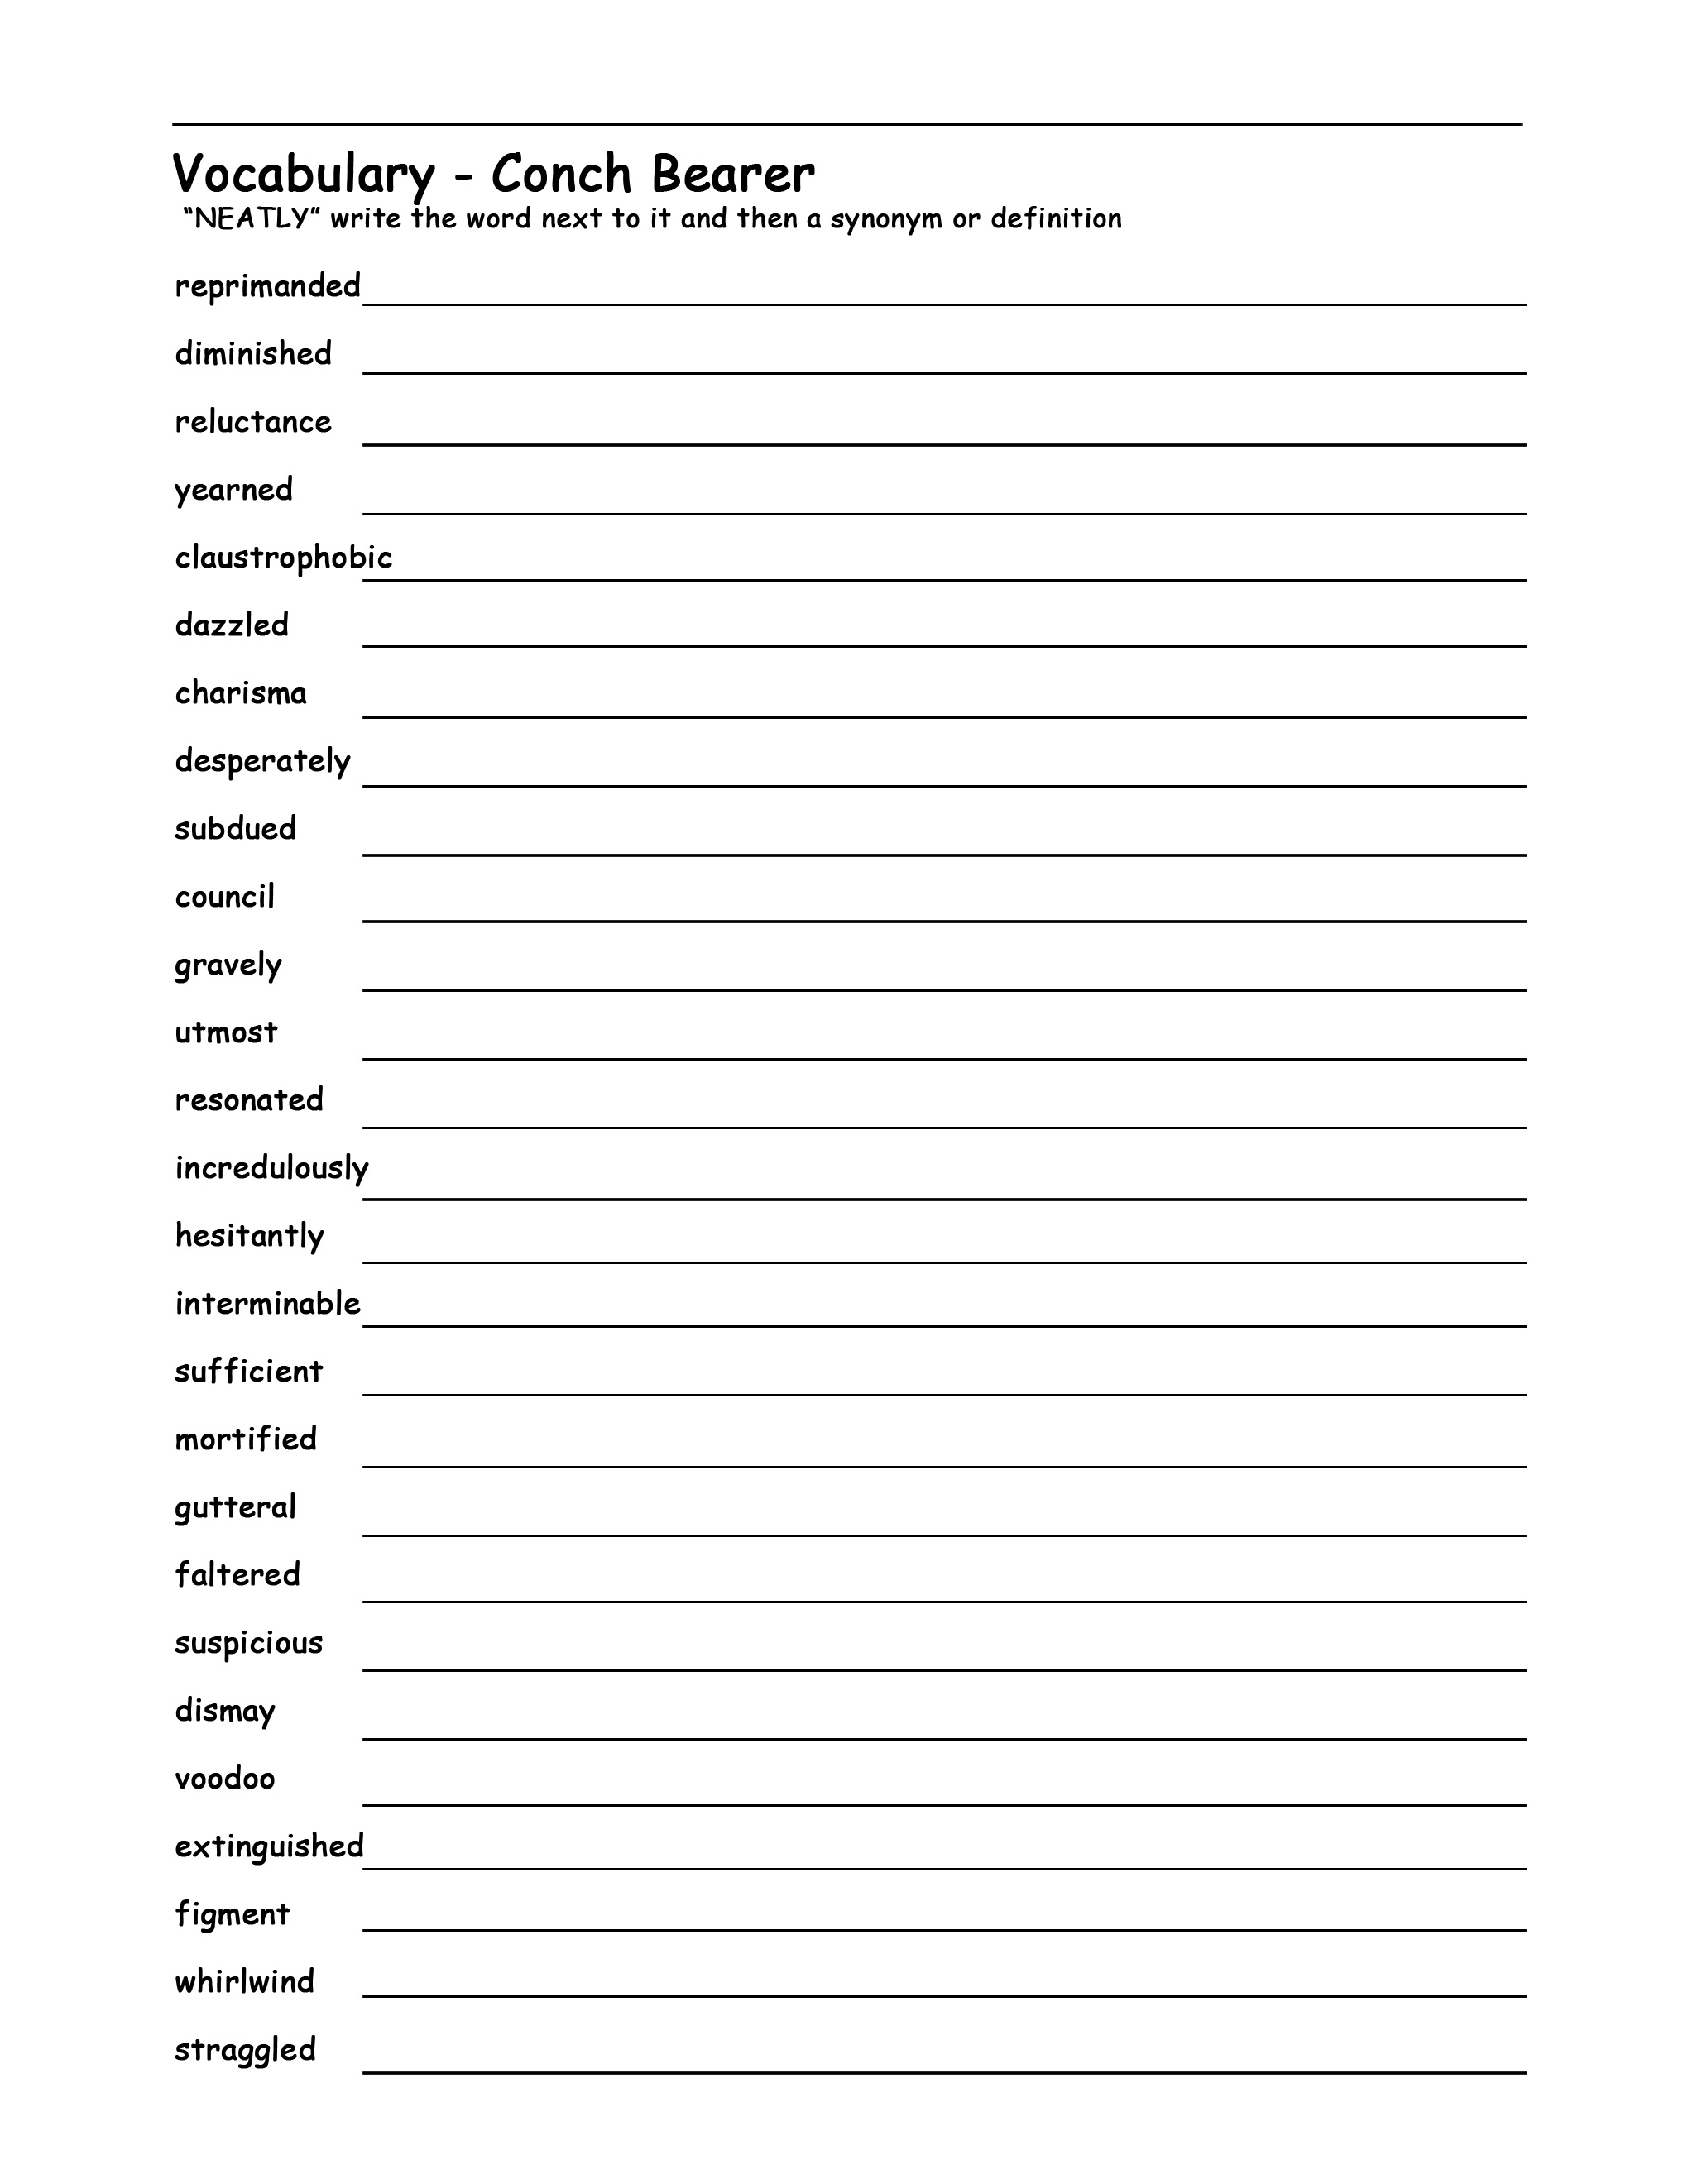 12-best-images-of-classroom-vocabulary-worksheets-classroom-language-worksheets-high-school